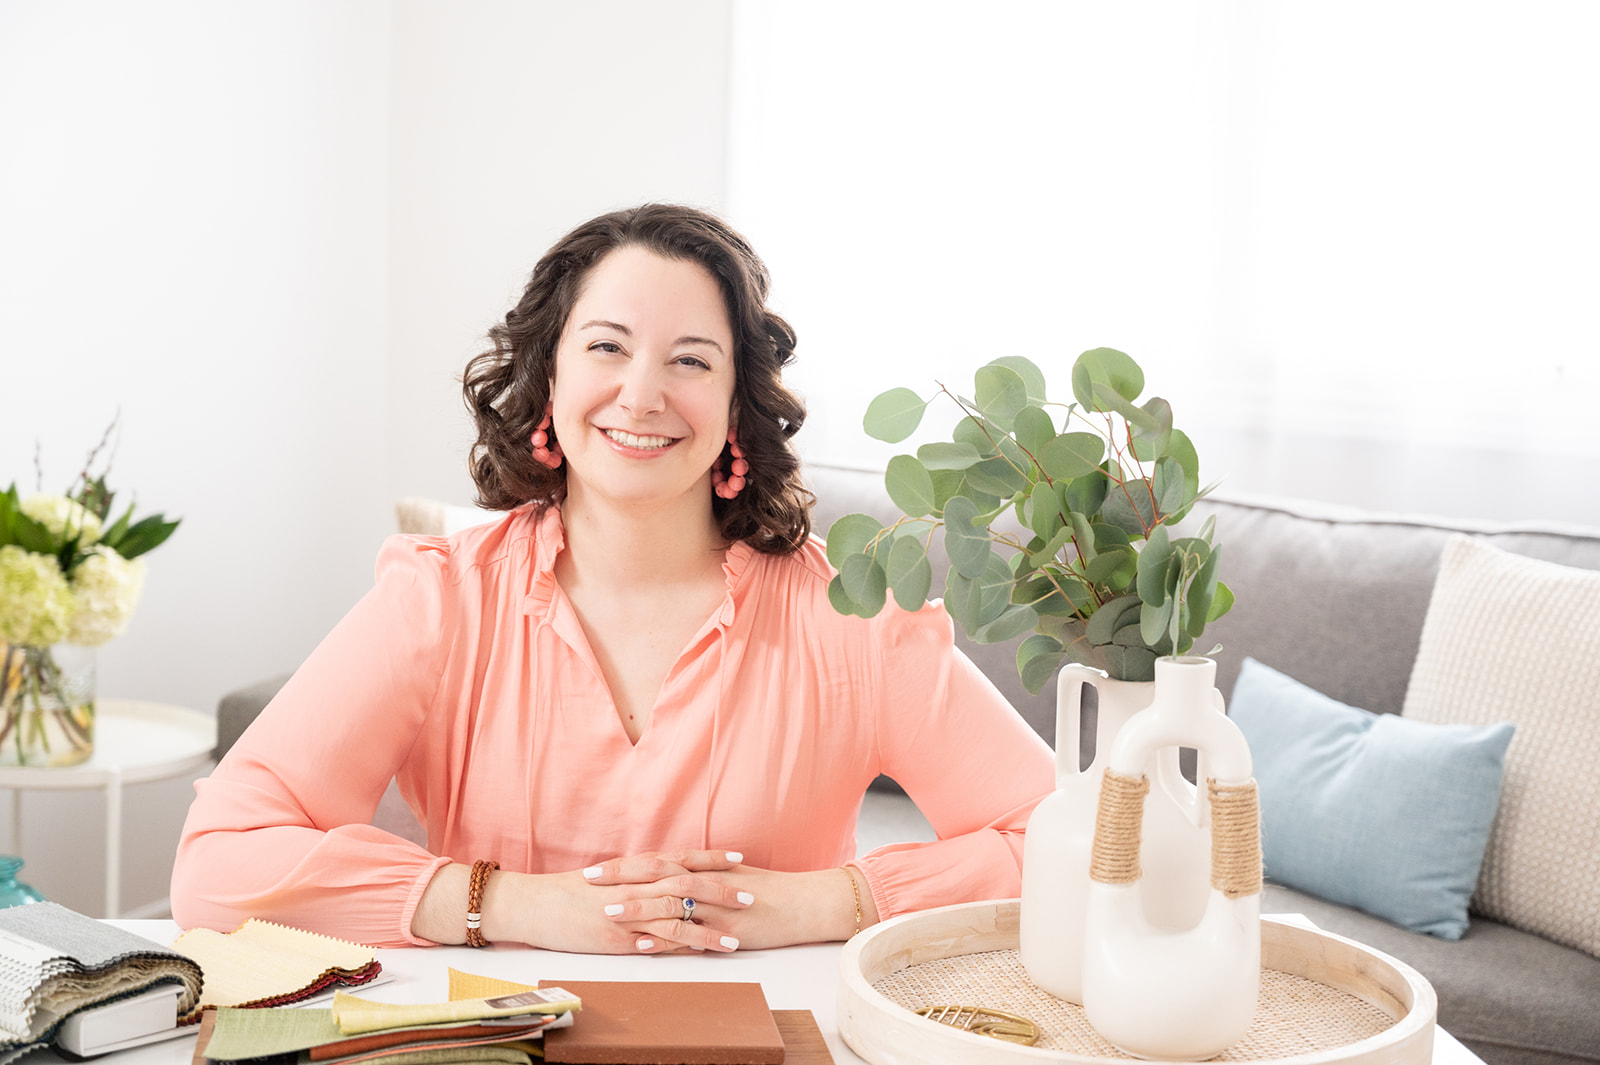 Interior designer smiling at her desk on her lifestyle branding photoshoot for her small business